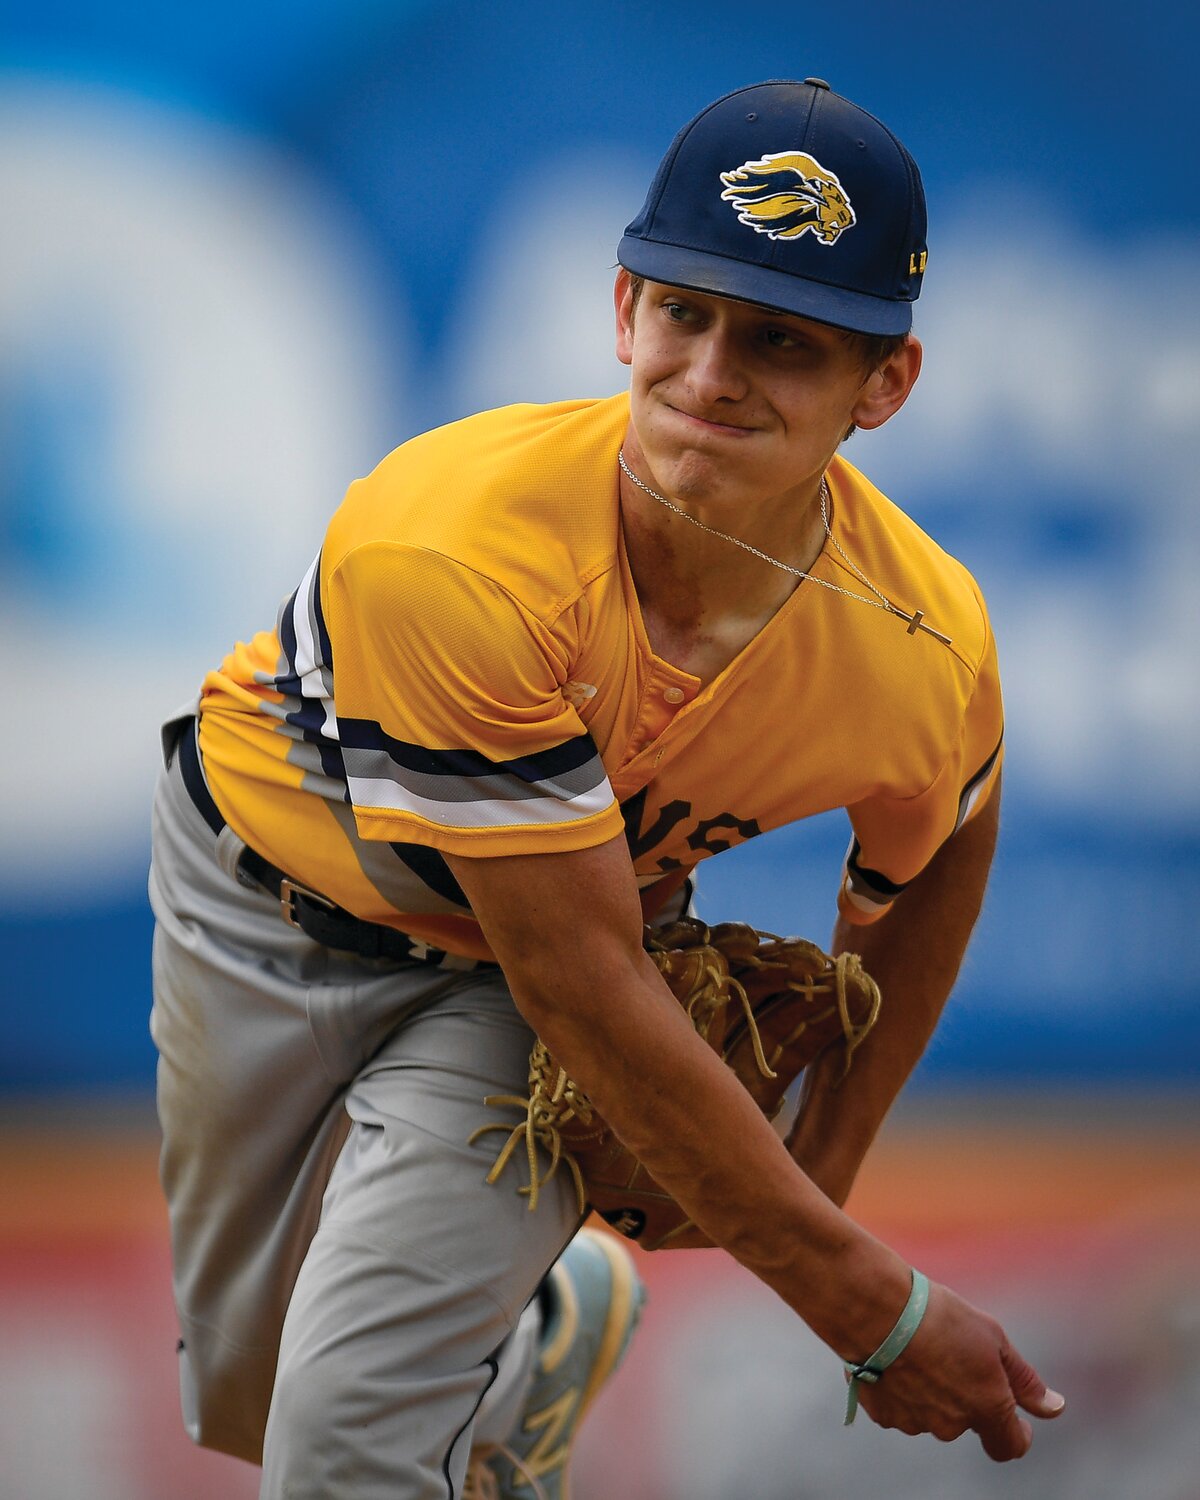 New Hope-Solebury’s Tyler Corino pitched six strong innings giving up two unearned runs and striking out five.